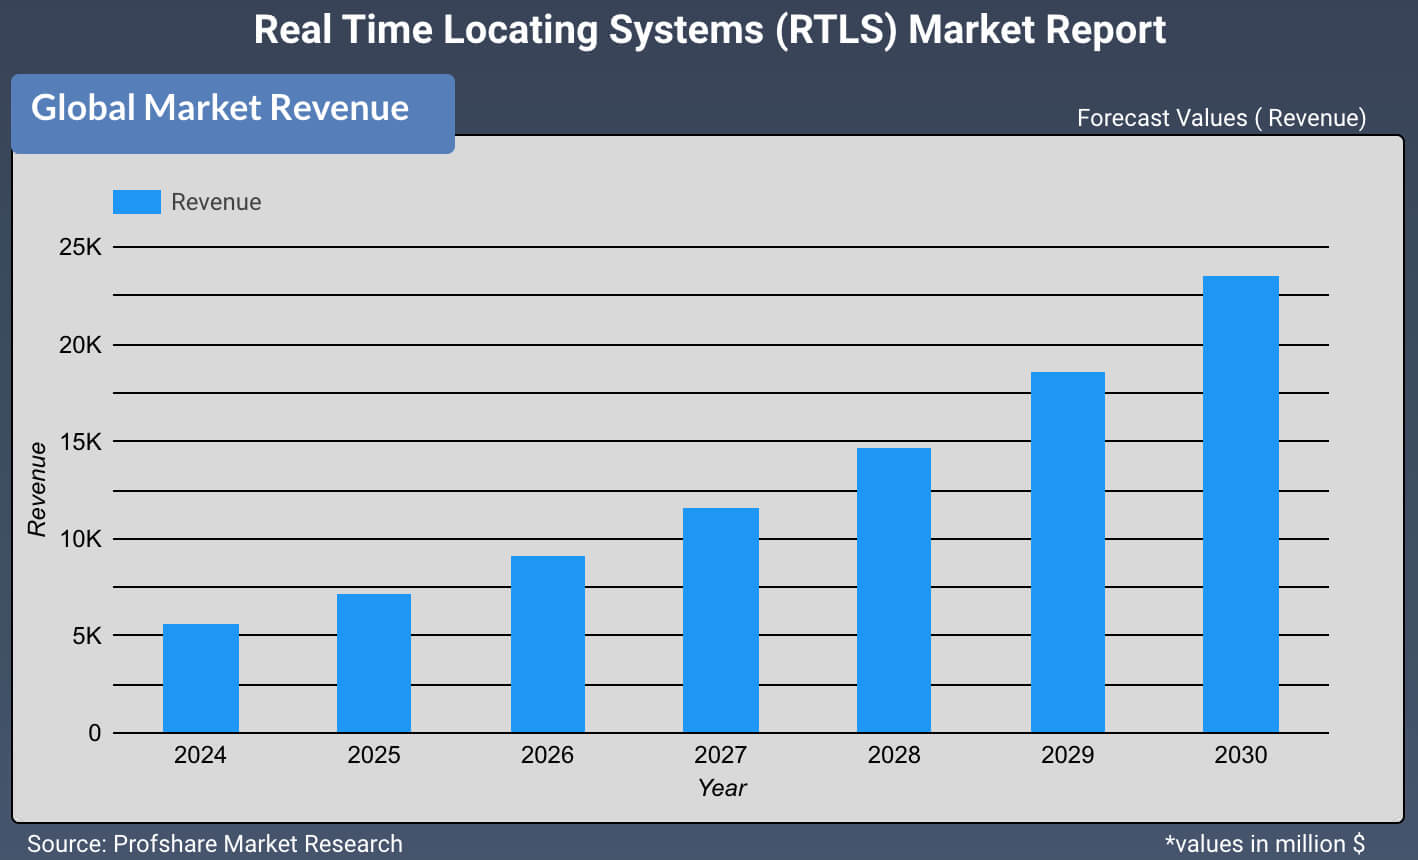 Real Time Locating Systems (RTLS) Market Report